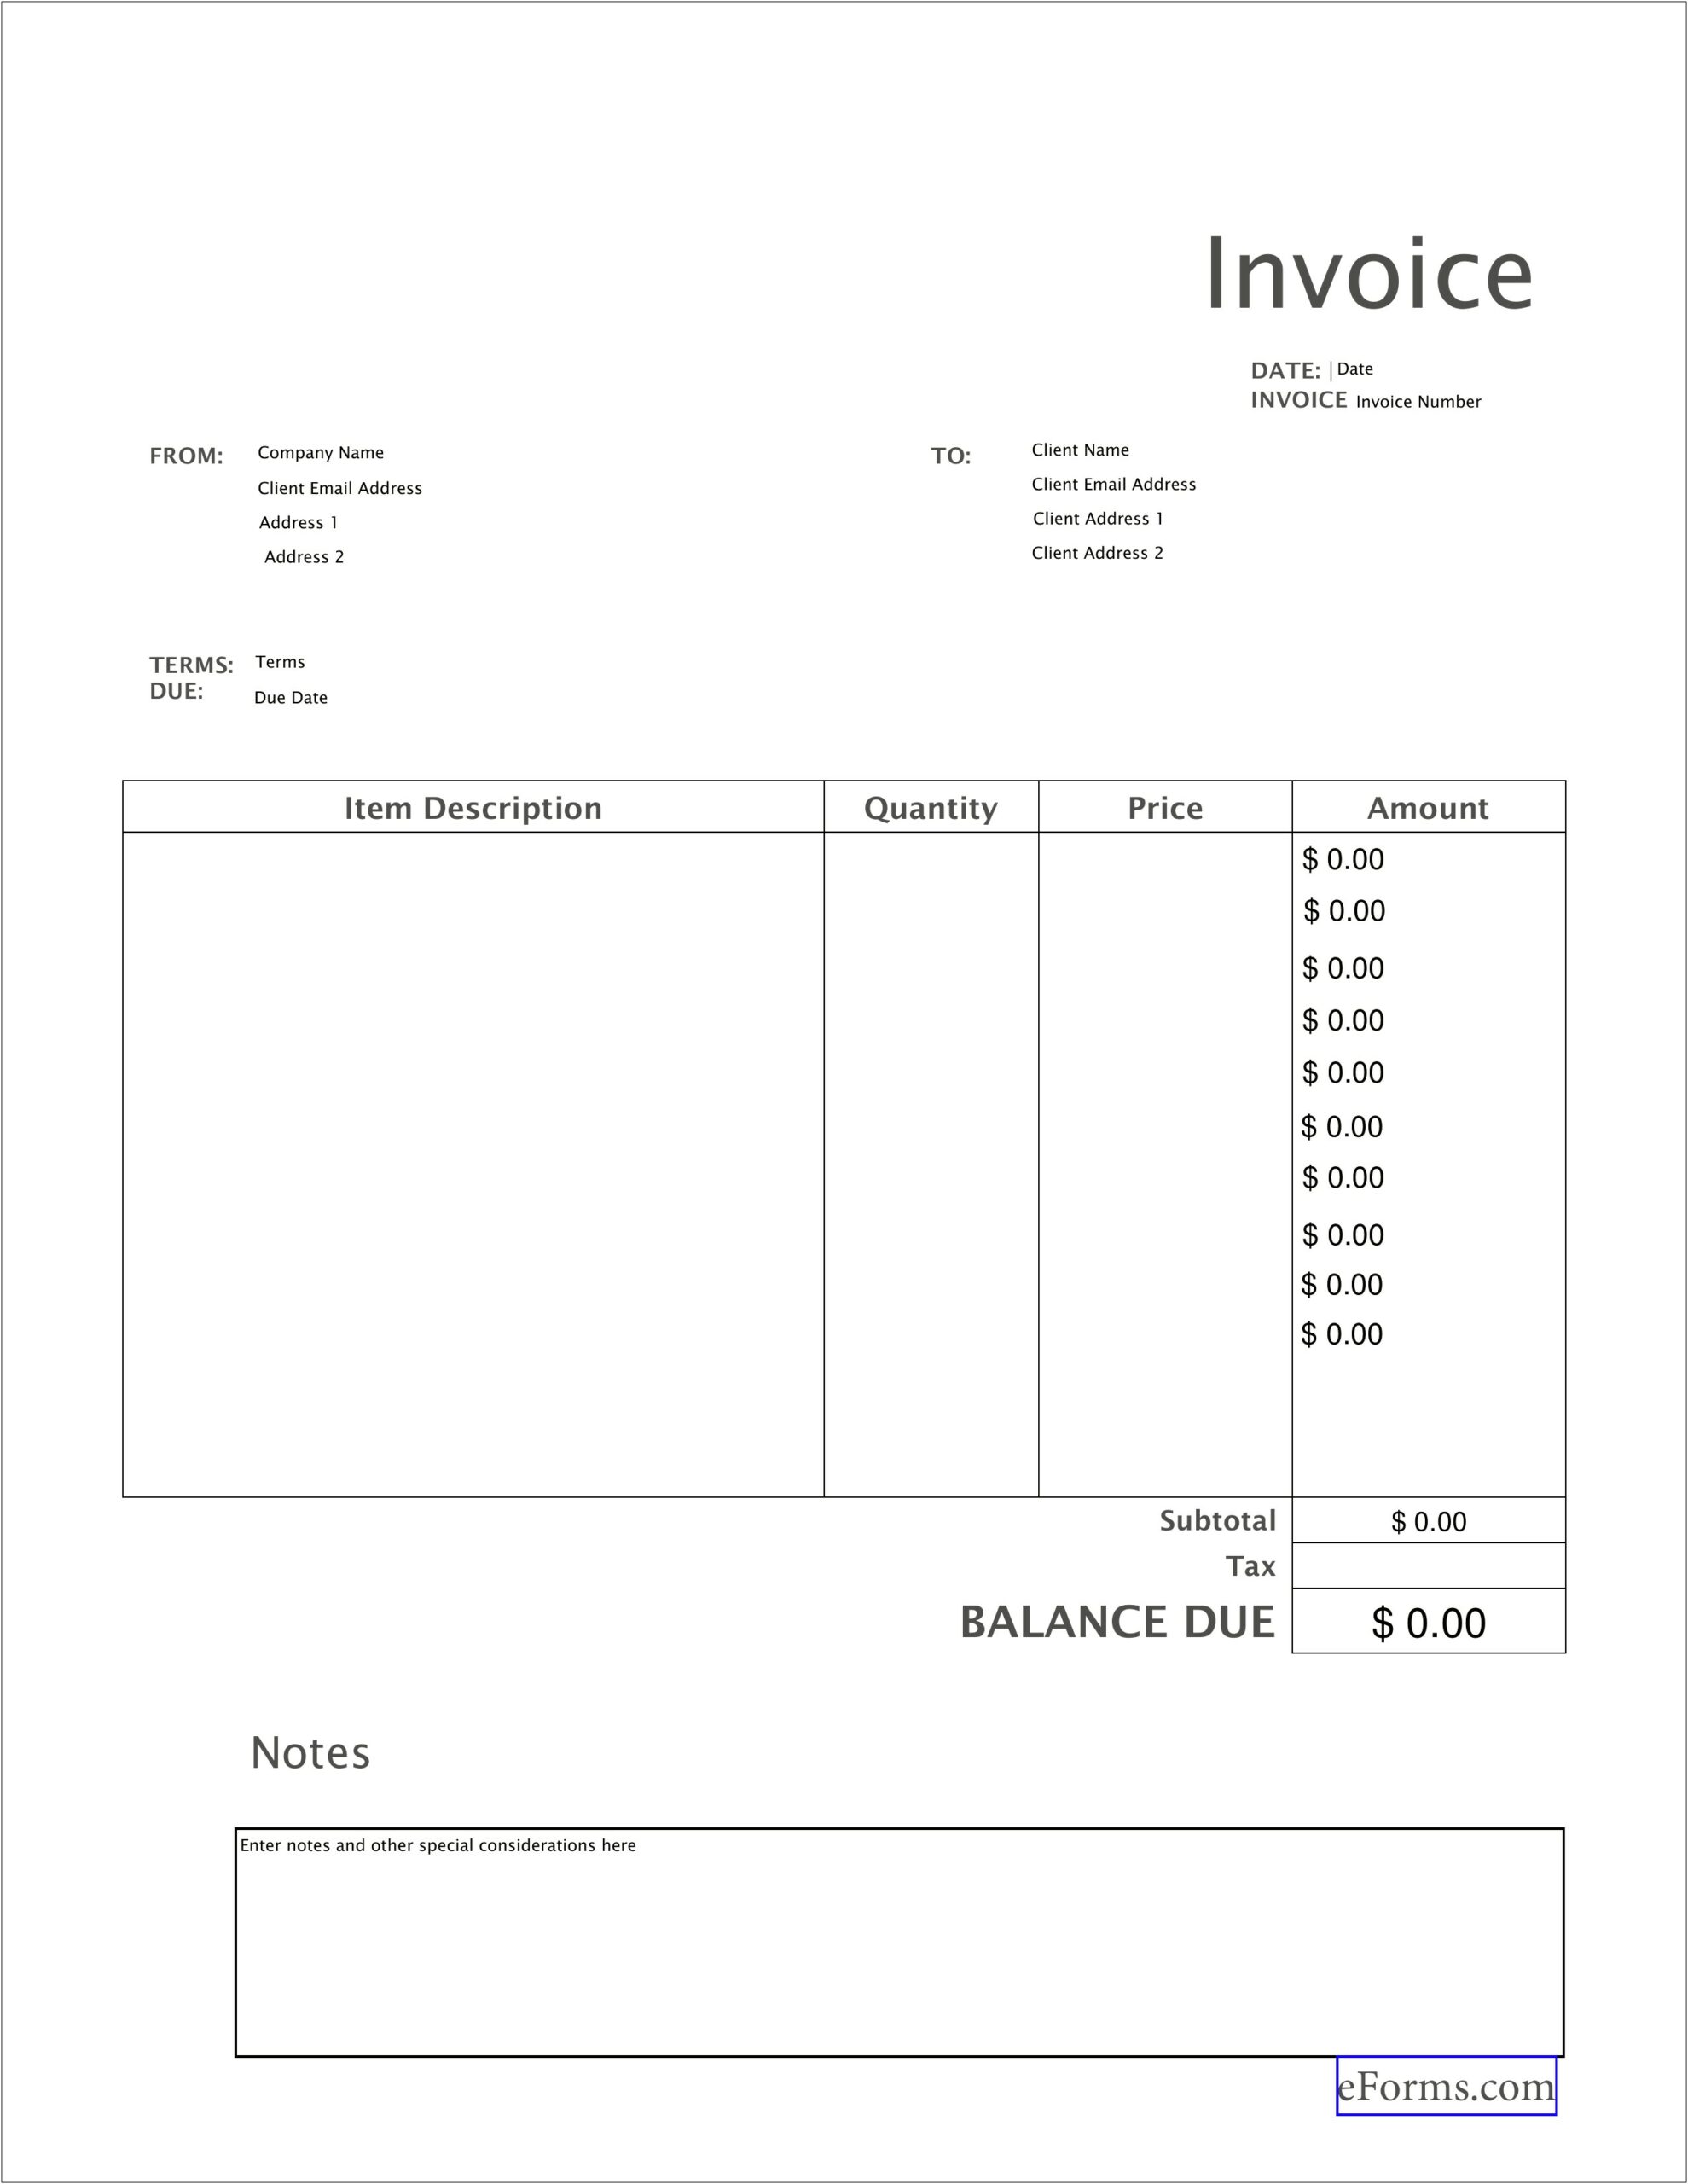 Microsoft Office Invoice Template Free Download